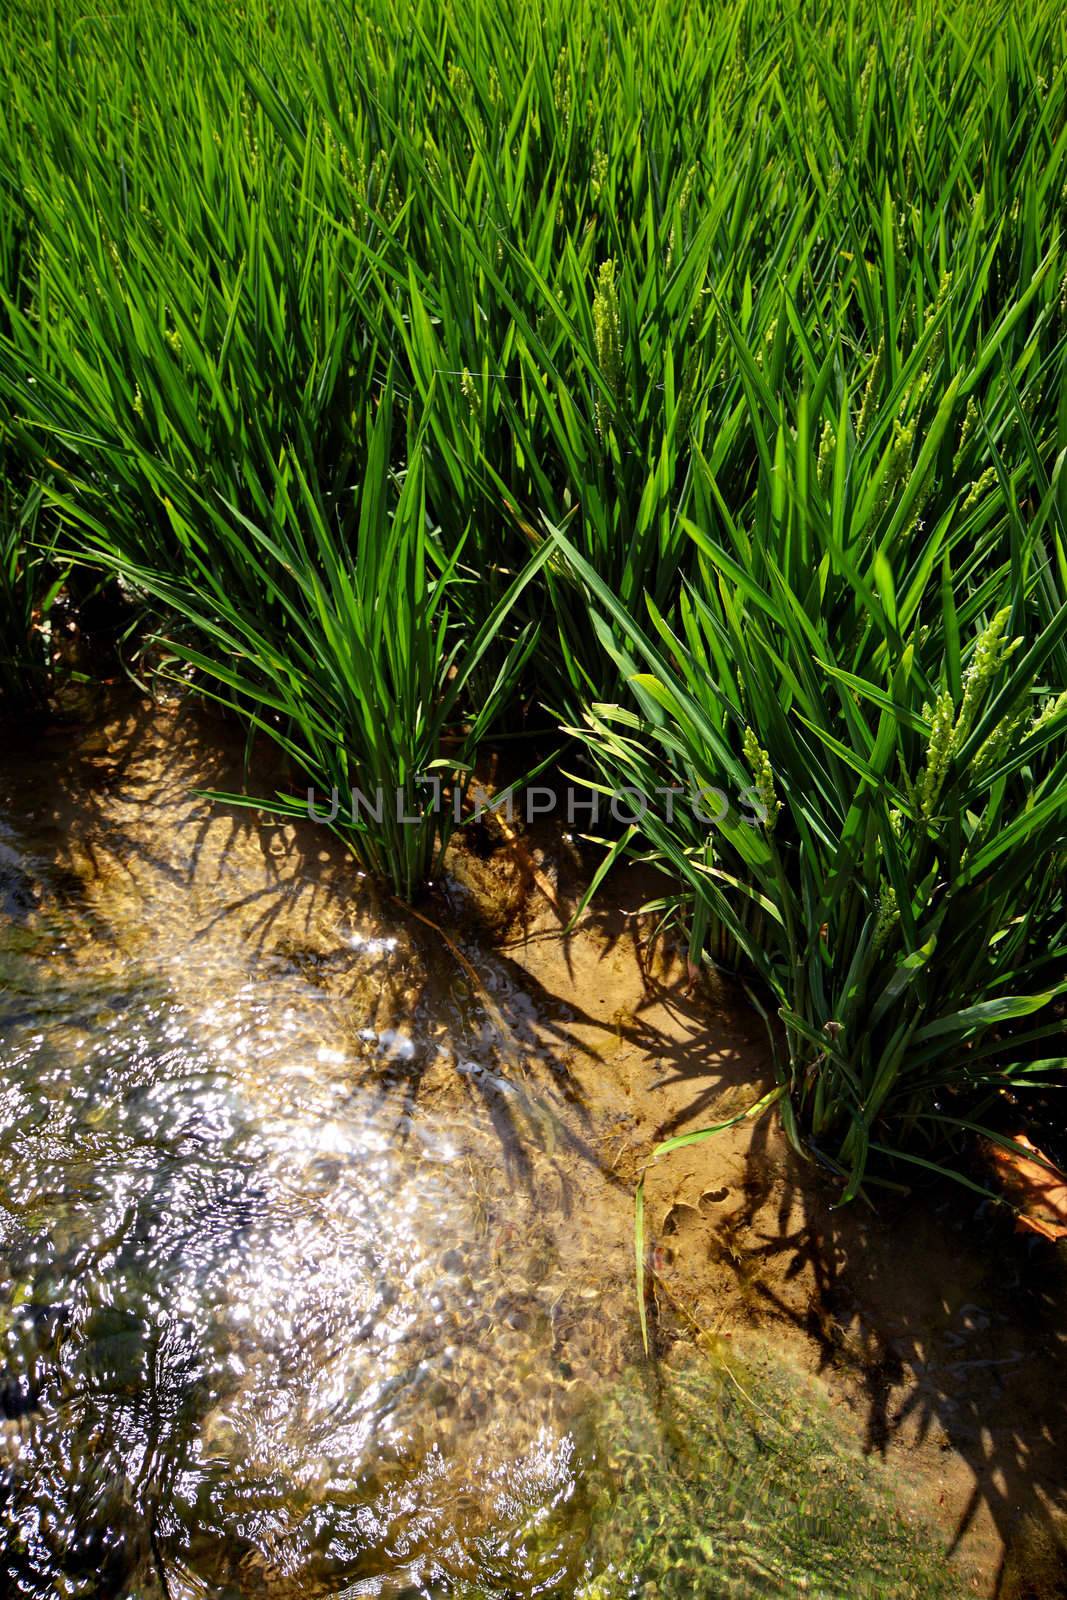 Rice at the edge of a Paddy Field in Tarragona, Spain